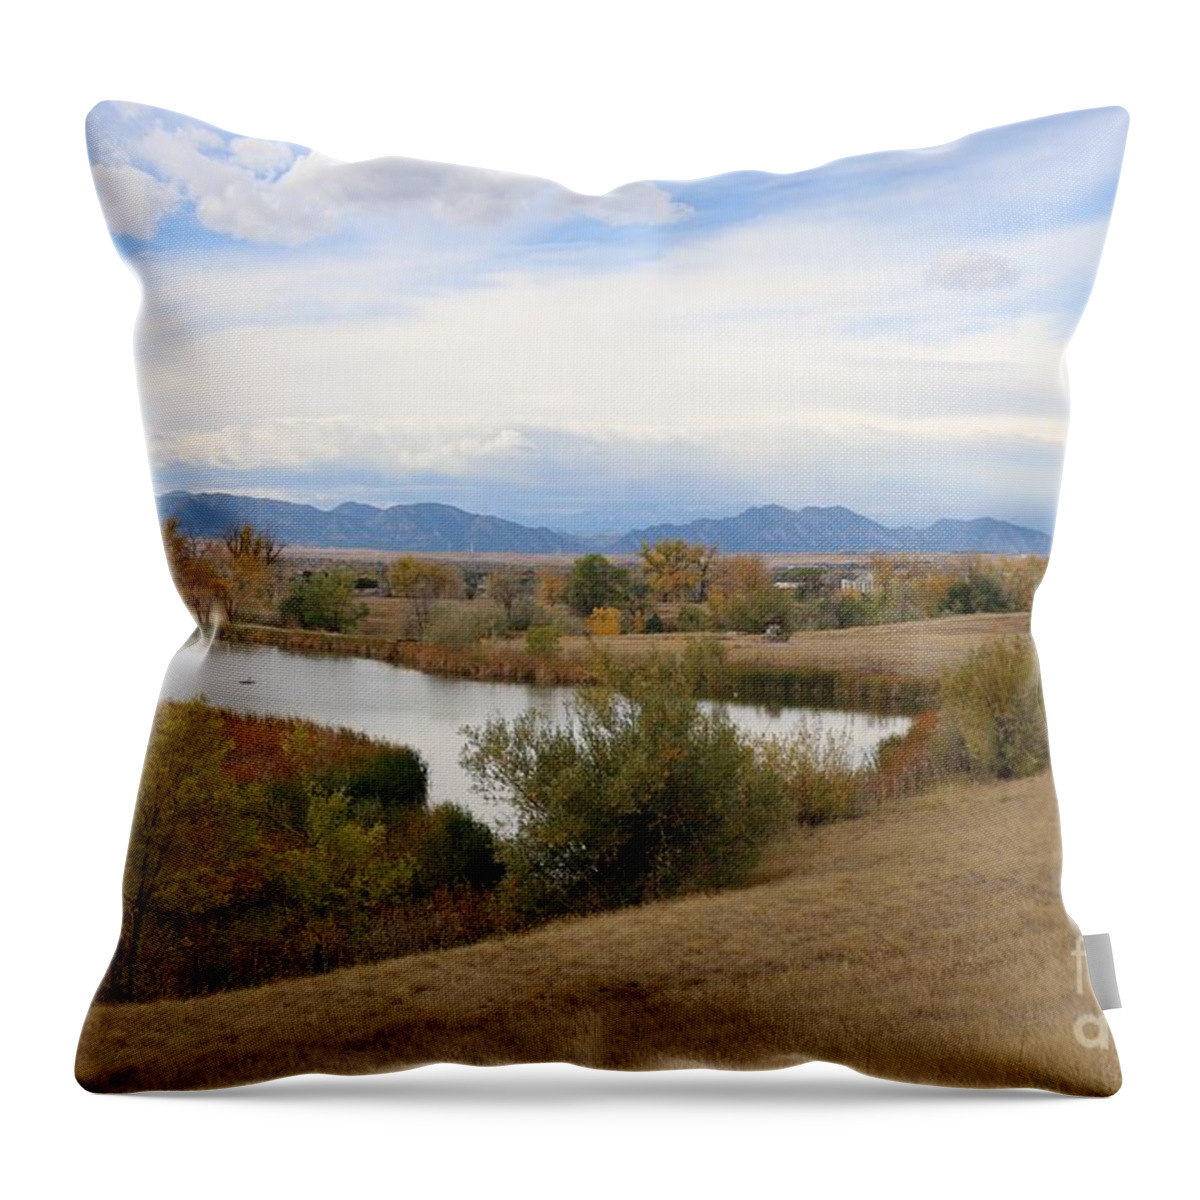 Westminster Throw Pillow featuring the photograph Westminster Colorado by Veronica Batterson